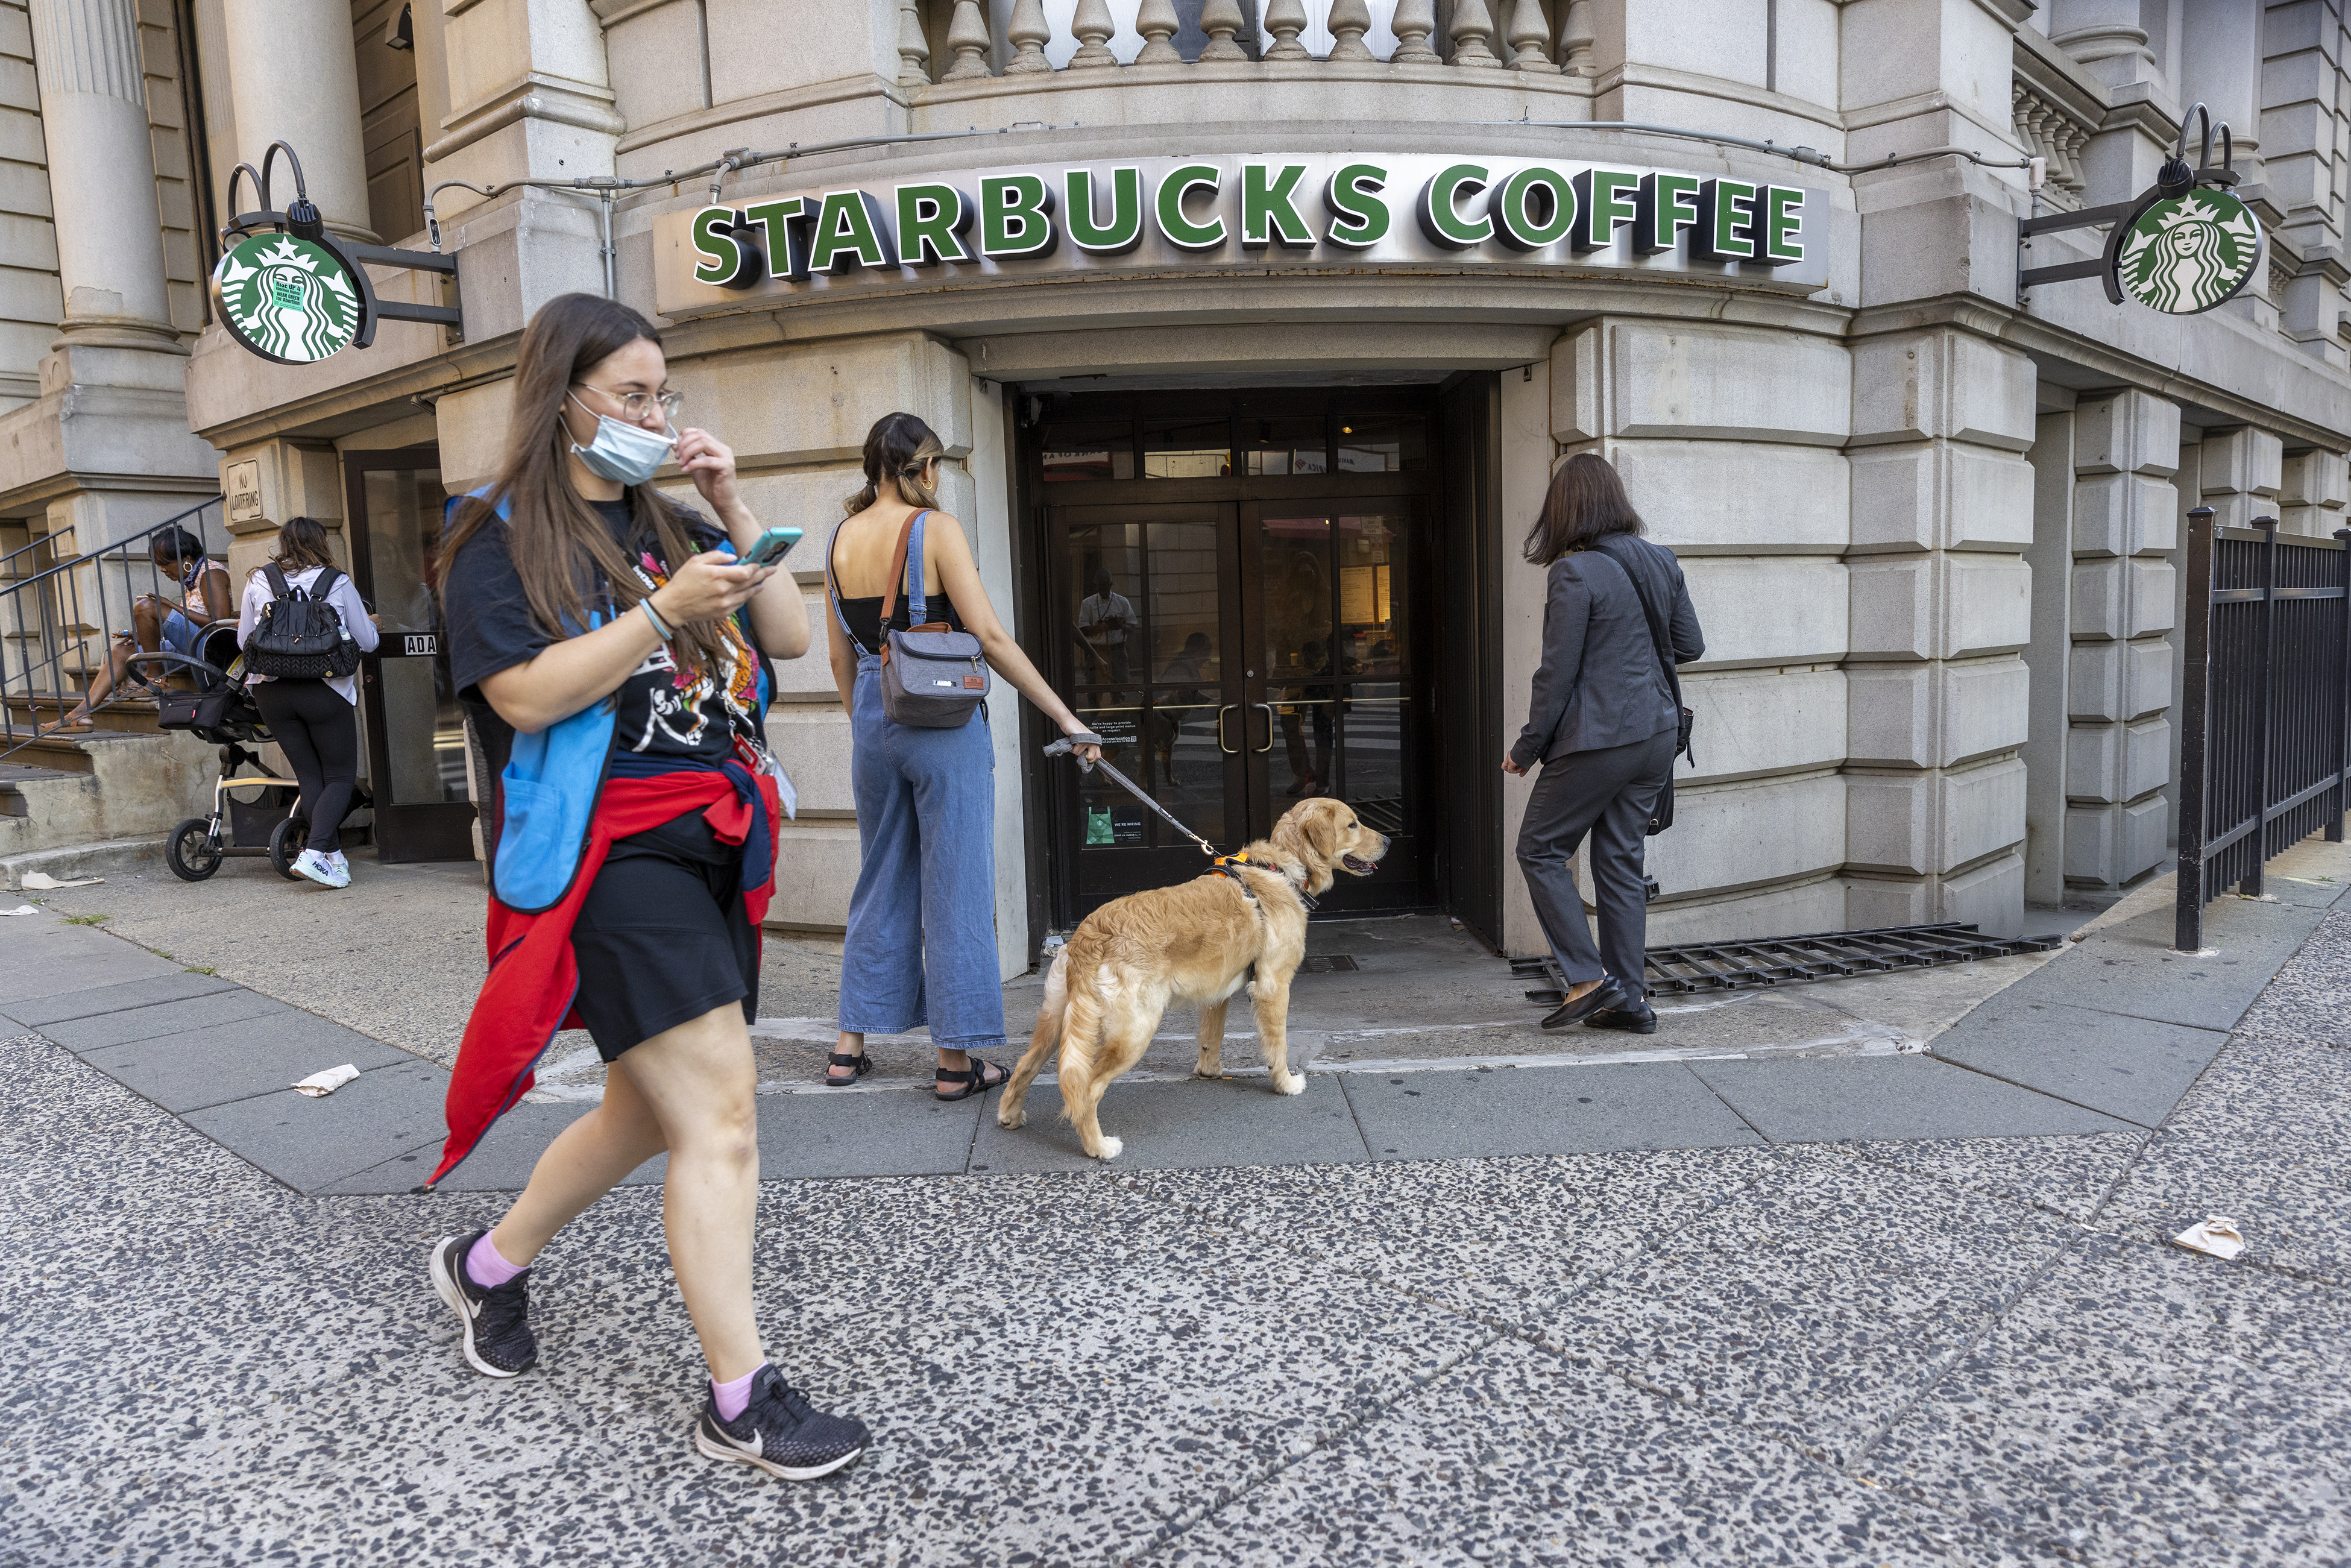 Philadelphia Starbucks in Center City closing due to safety concerns